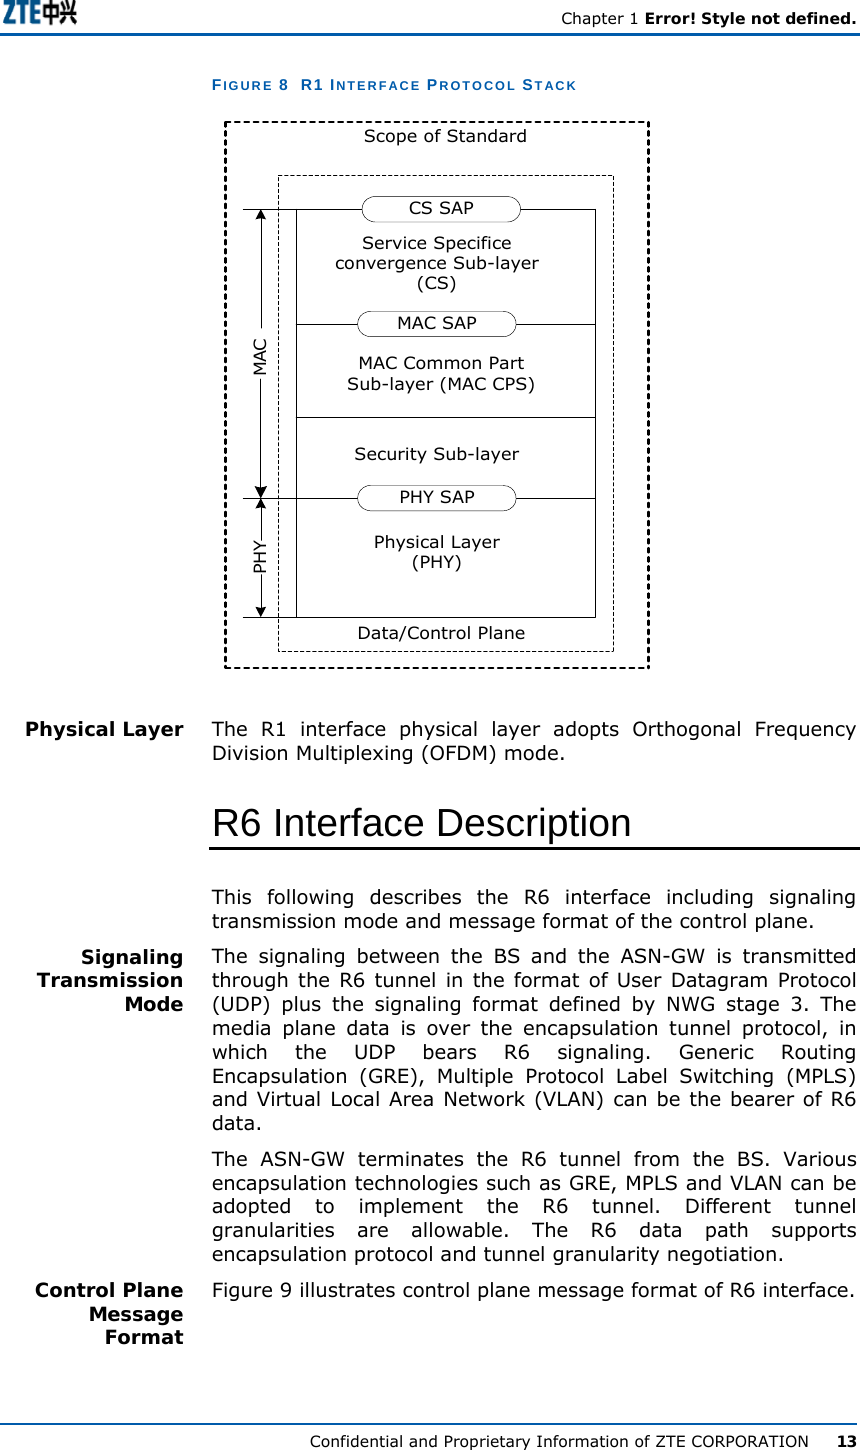   Chapter 1 Error! Style not defined.  Confidential and Proprietary Information of ZTE CORPORATION      13 FIGURE 8  R1 INTERFACE PROTOCOL STACK CS SAPMAC SAPPHY SAPService Specificeconvergence Sub-layer(CS)MAC Common PartSub-layer (MAC CPS)Security Sub-layerPhysical Layer(PHY)Scope of StandardData/Control PlanePHY MAC The R1 interface physical layer adopts Orthogonal Frequency Division Multiplexing (OFDM) mode. R6 Interface Description This following describes the R6 interface including signaling transmission mode and message format of the control plane. The signaling between the BS and the ASN-GW is transmitted through the R6 tunnel in the format of User Datagram Protocol (UDP) plus the signaling format defined by NWG stage 3. The media plane data is over the encapsulation tunnel protocol, in which the UDP bears R6 signaling. Generic Routing Encapsulation (GRE), Multiple Protocol Label Switching (MPLS) and Virtual Local Area Network (VLAN) can be the bearer of R6 data.  The ASN-GW terminates the R6 tunnel from the BS. Various encapsulation technologies such as GRE, MPLS and VLAN can be adopted to implement the R6 tunnel. Different tunnel granularities are allowable. The R6 data path supports encapsulation protocol and tunnel granularity negotiation. Figure 9 illustrates control plane message format of R6 interface. Physical Layer Signaling Transmission Mode  Control Plane Message Format 